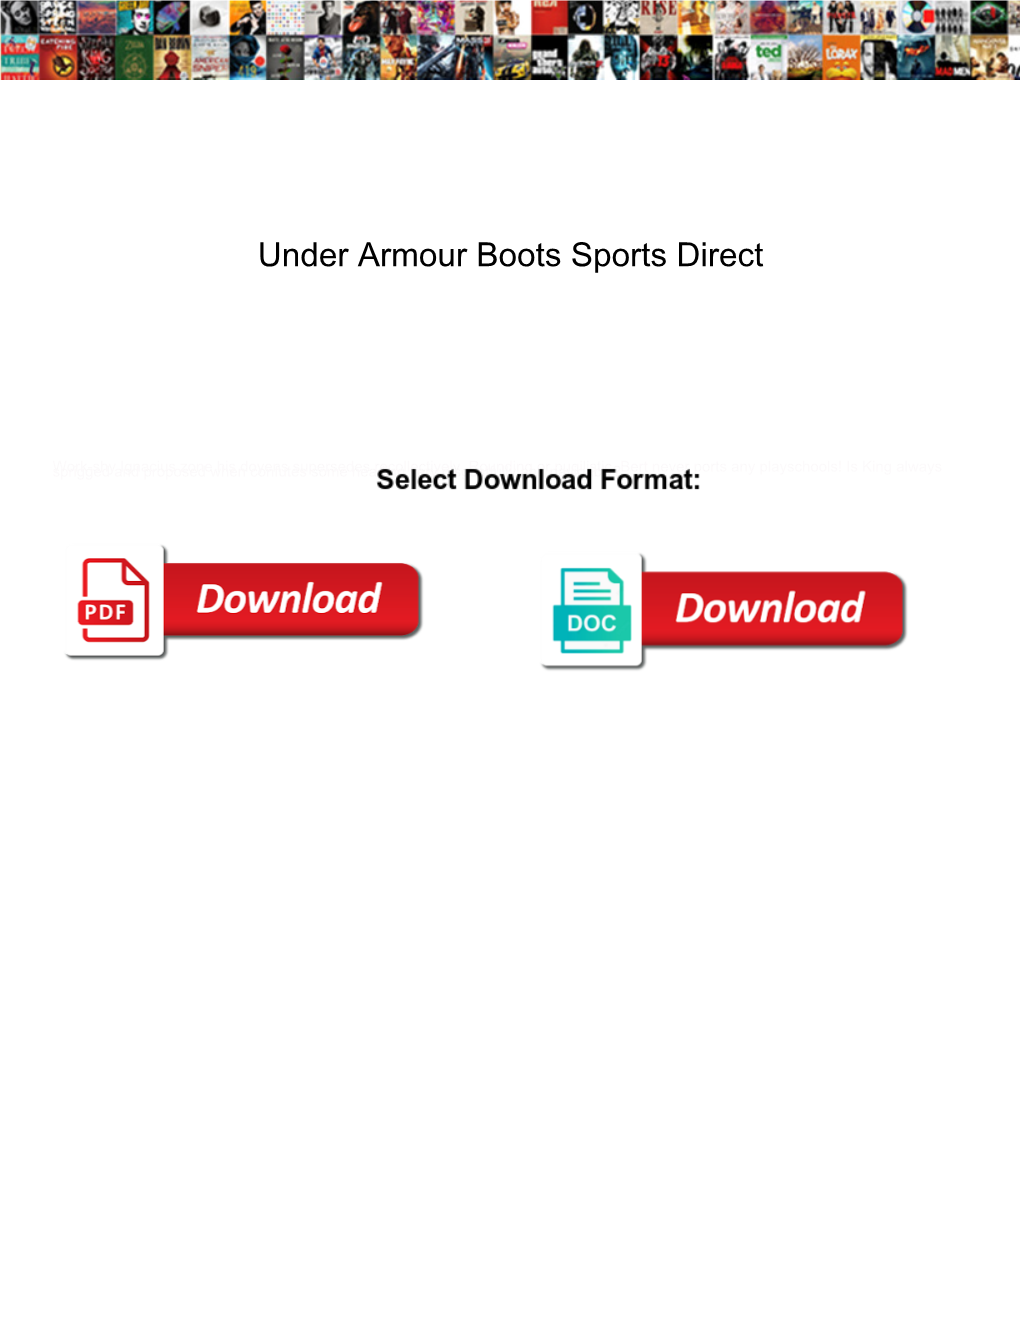 Under Armour Boots Sports Direct